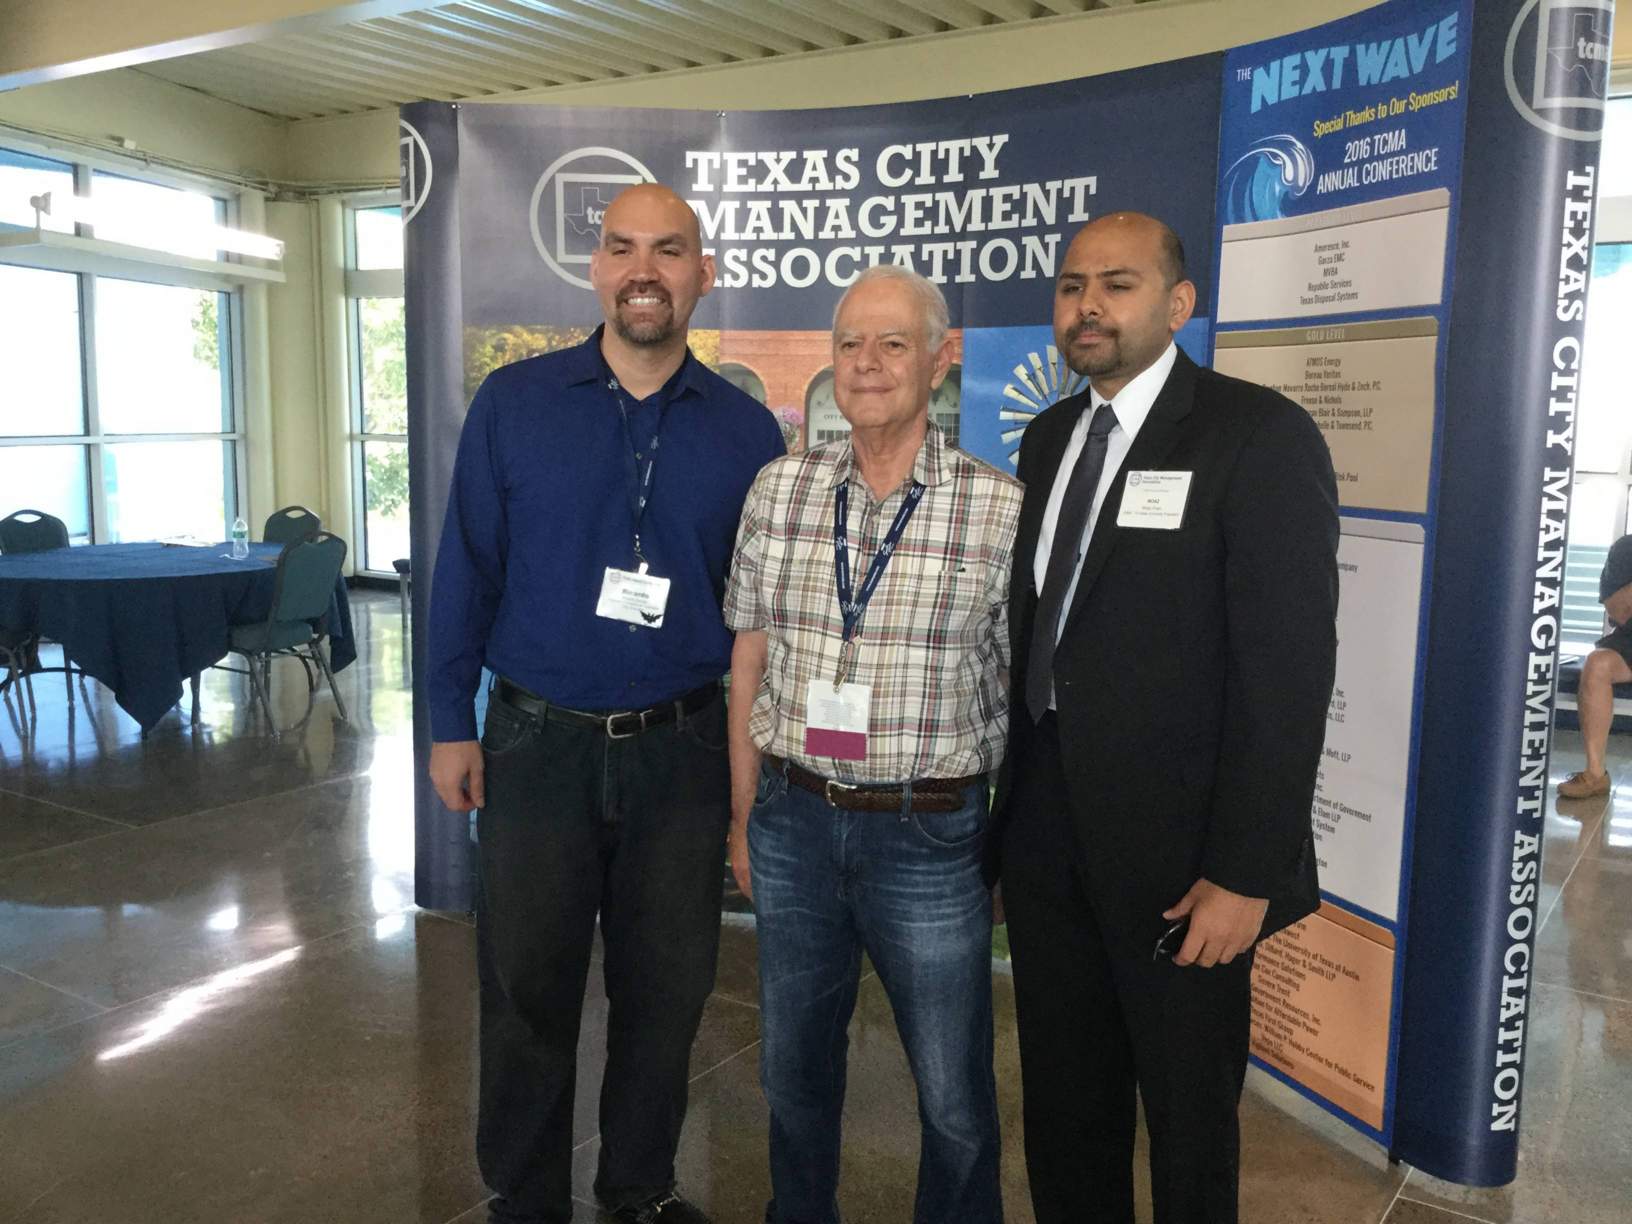 Students attend Texas City Management Association Conference